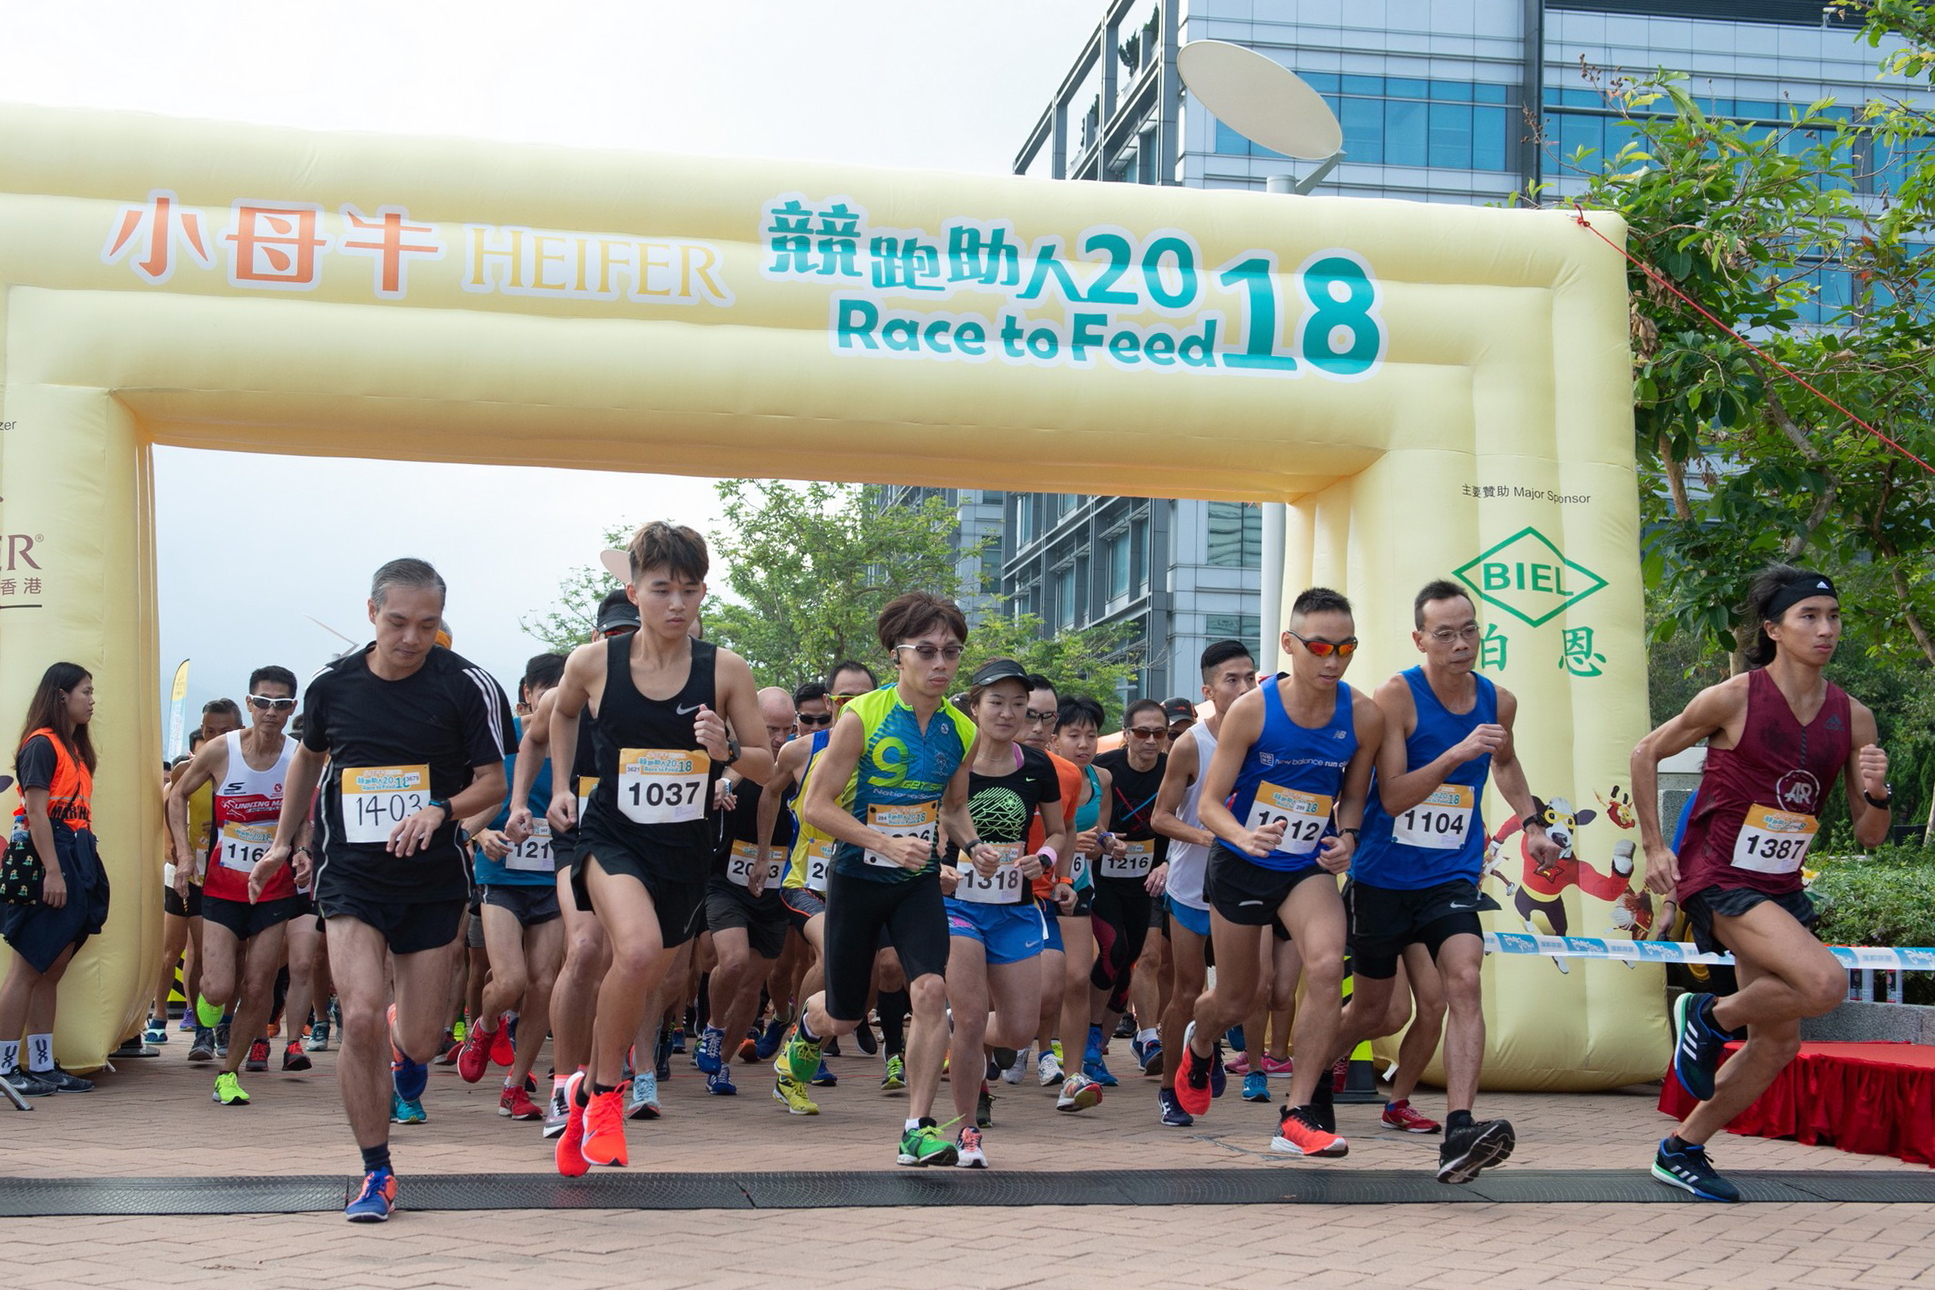 Heifer Hong Kong has cancelled its annual fundraising event Race to Feed, which had been scheduled to take place in Hong Kong on 17 November 2019. Since its launch in 2006, Race to Feed has raised over HK$49 million and attracted more than 9,000 runners to join the race. Vivian Kong Man-wai, Hong Kong fencer who ranked world no.1 for Women's Épée, and Hong Kong hurdler and Asian Games medalist, Lui Lai-yiu, were expected to be two of the star runners of Heifer Race to Feed 2019 Click to enlarge.